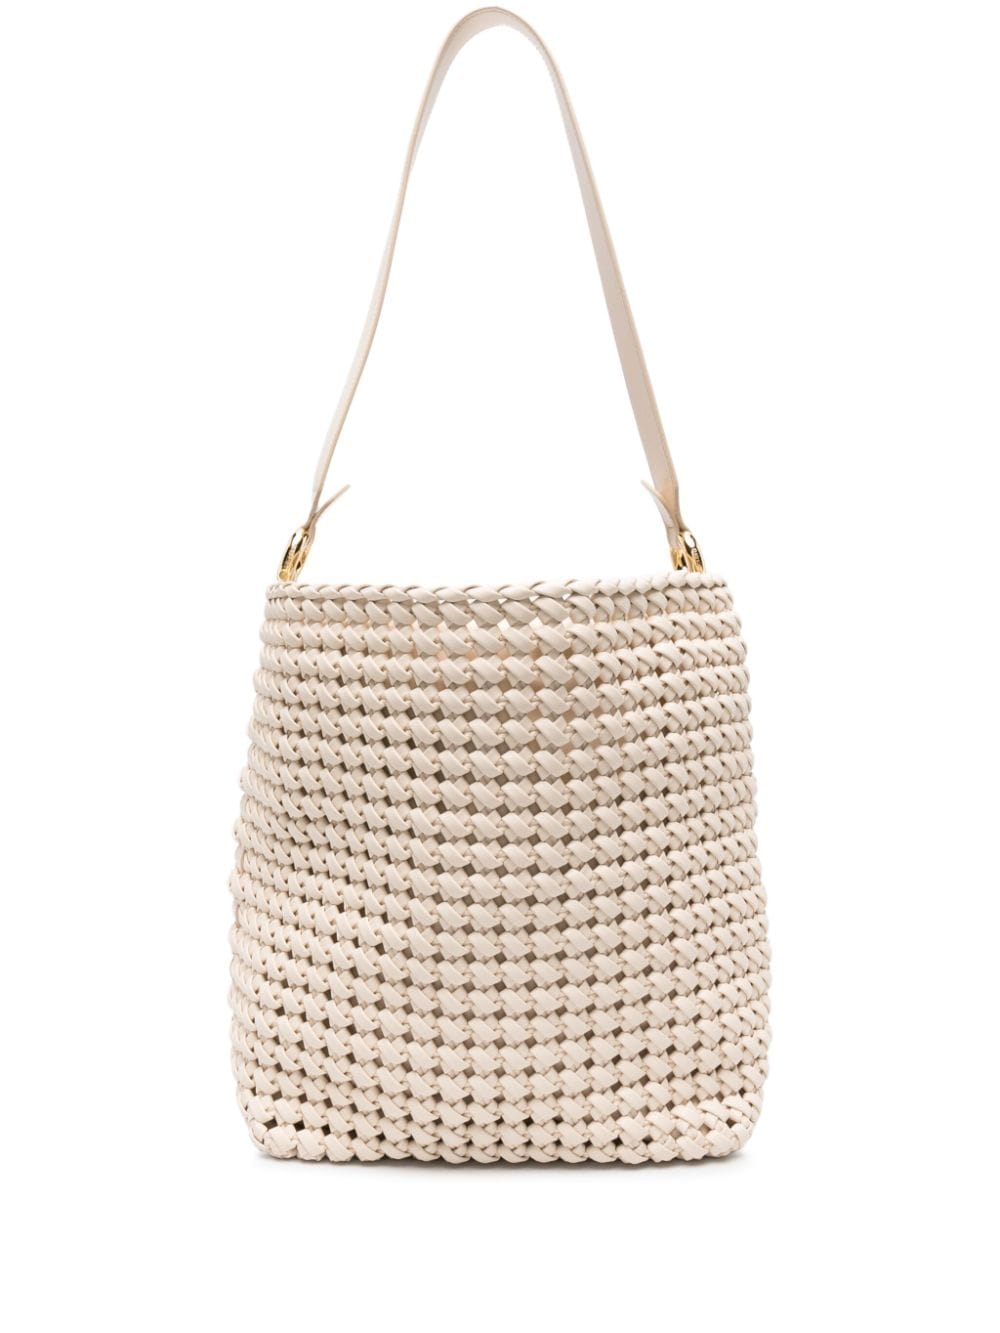 Themoirè Phoebe knotted shoulder bag